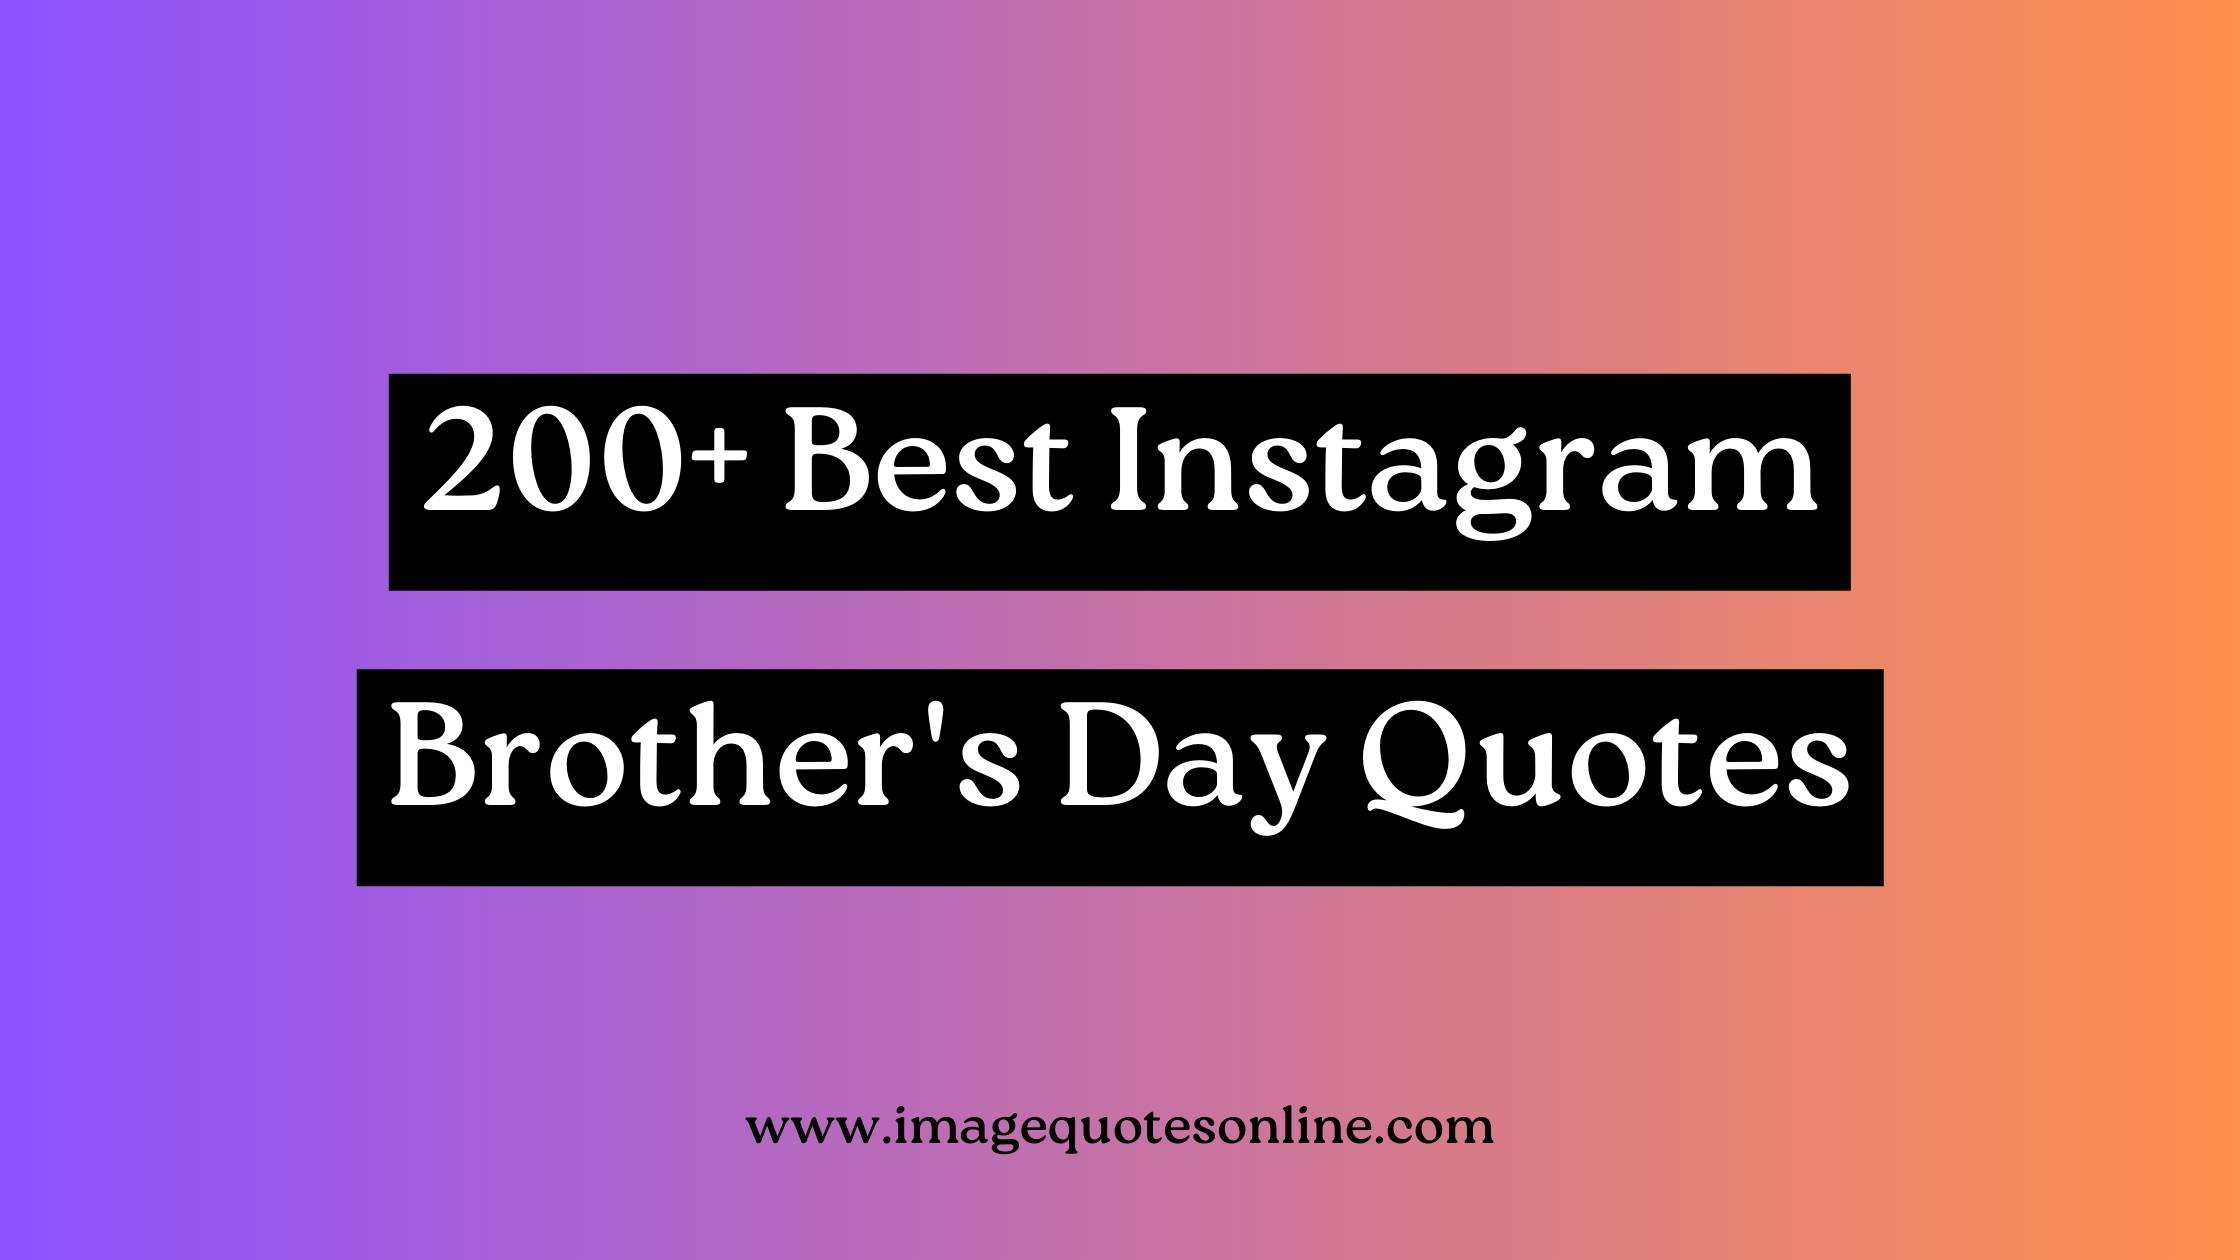 brothers day quotes for instagram